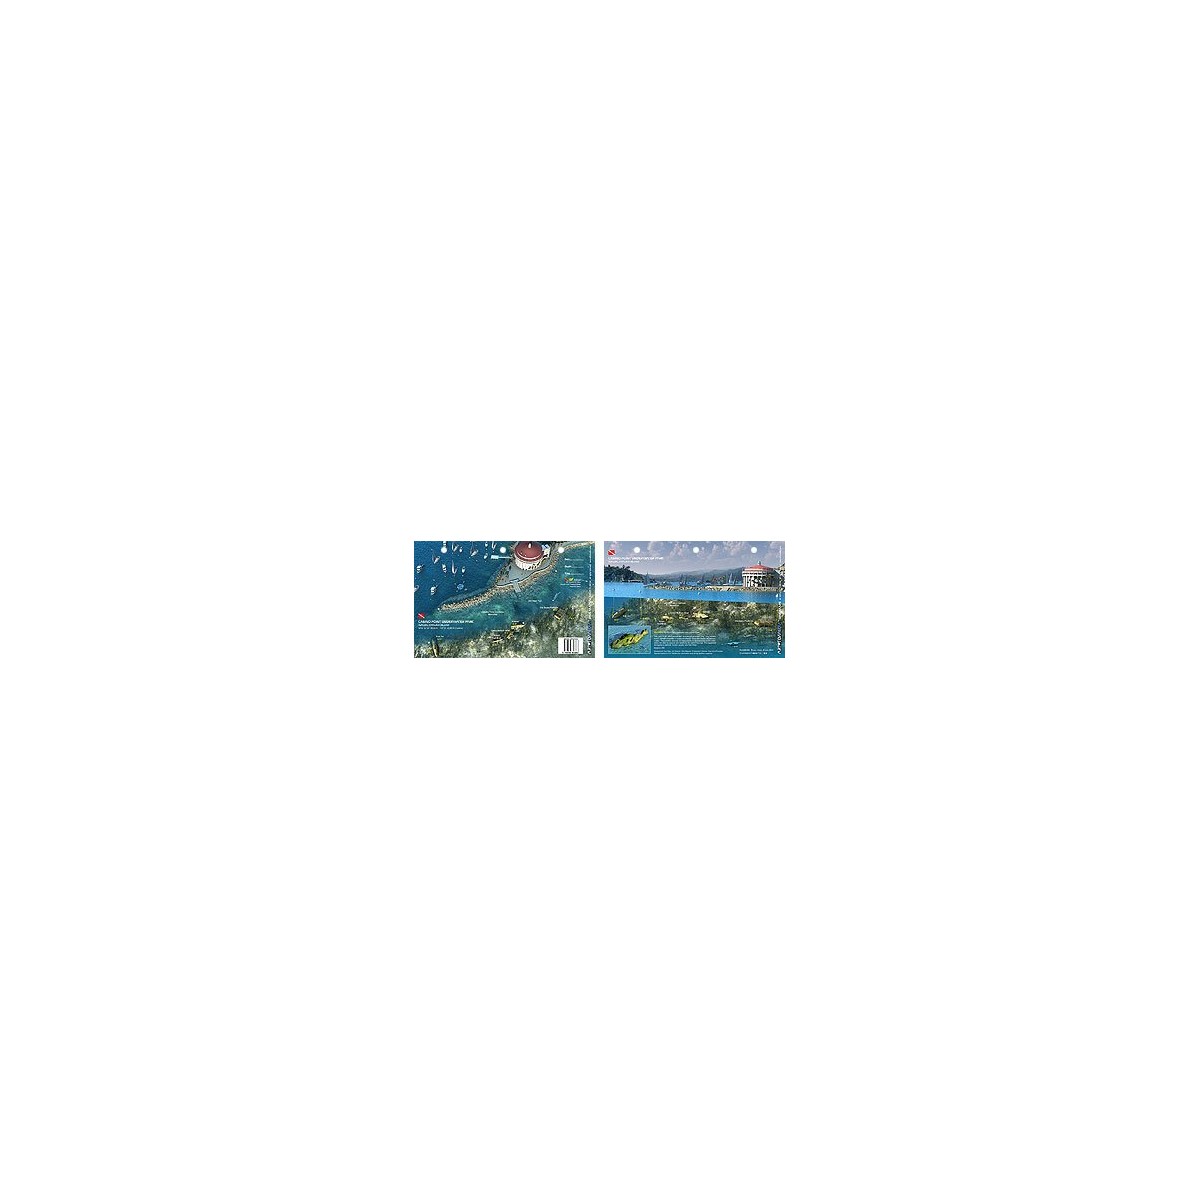 Avalon in Catalina Island, California (8.5 x 5.5 Inches) (21.6 x 15cm) - New Art to Media Underwater Waterproof 3D Dive Site Map